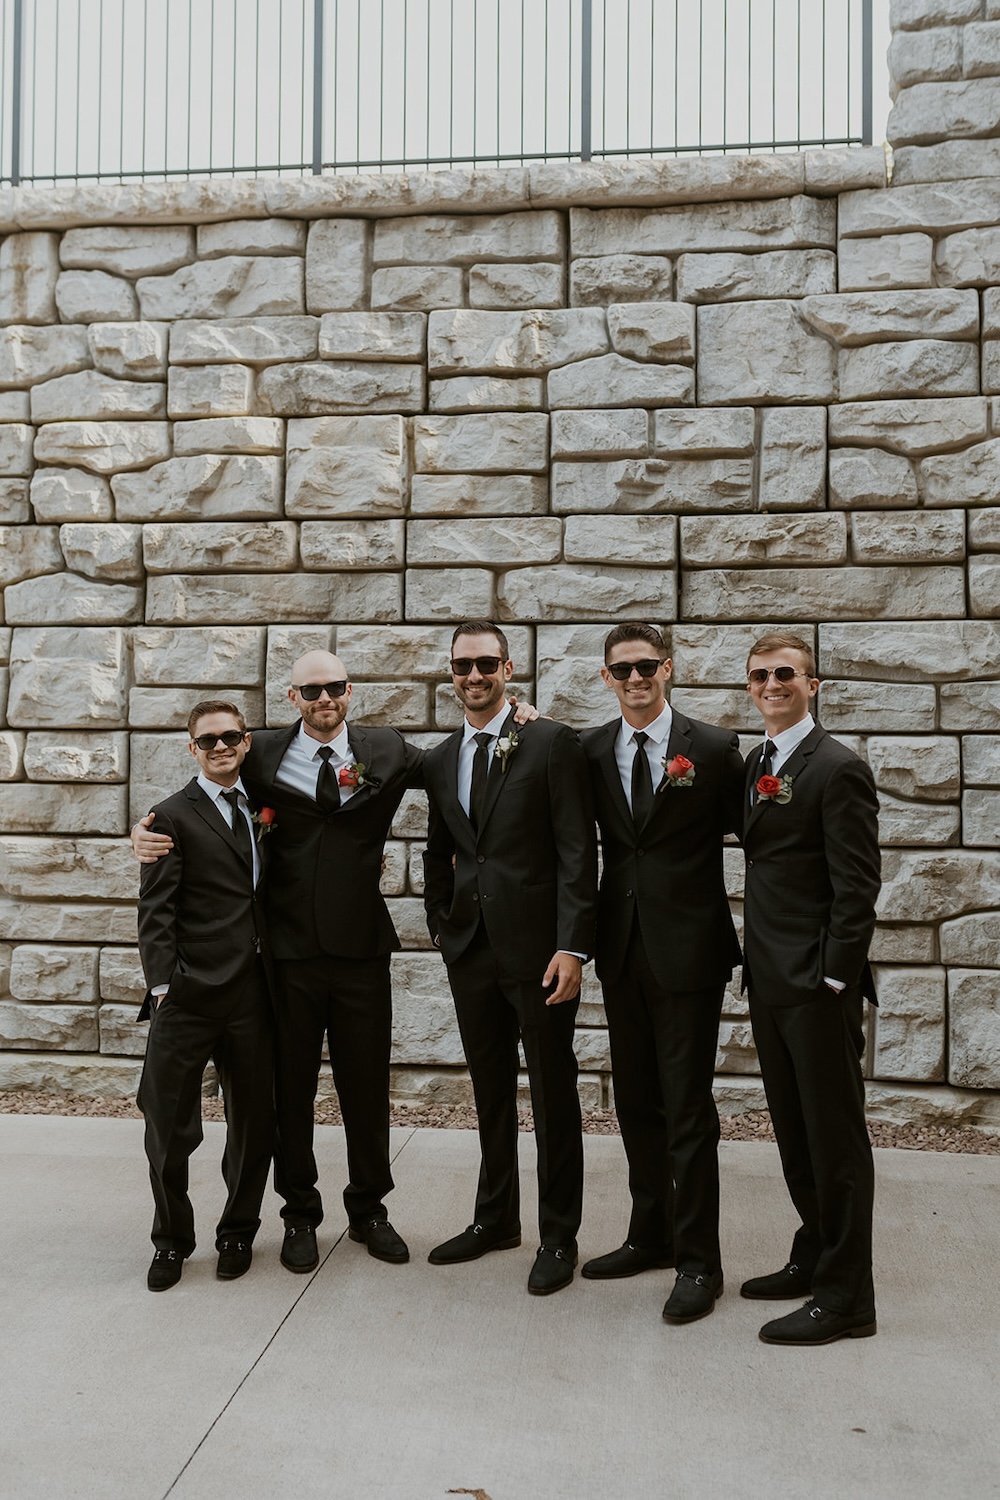 The groomsmen stand together with sunglasses on.